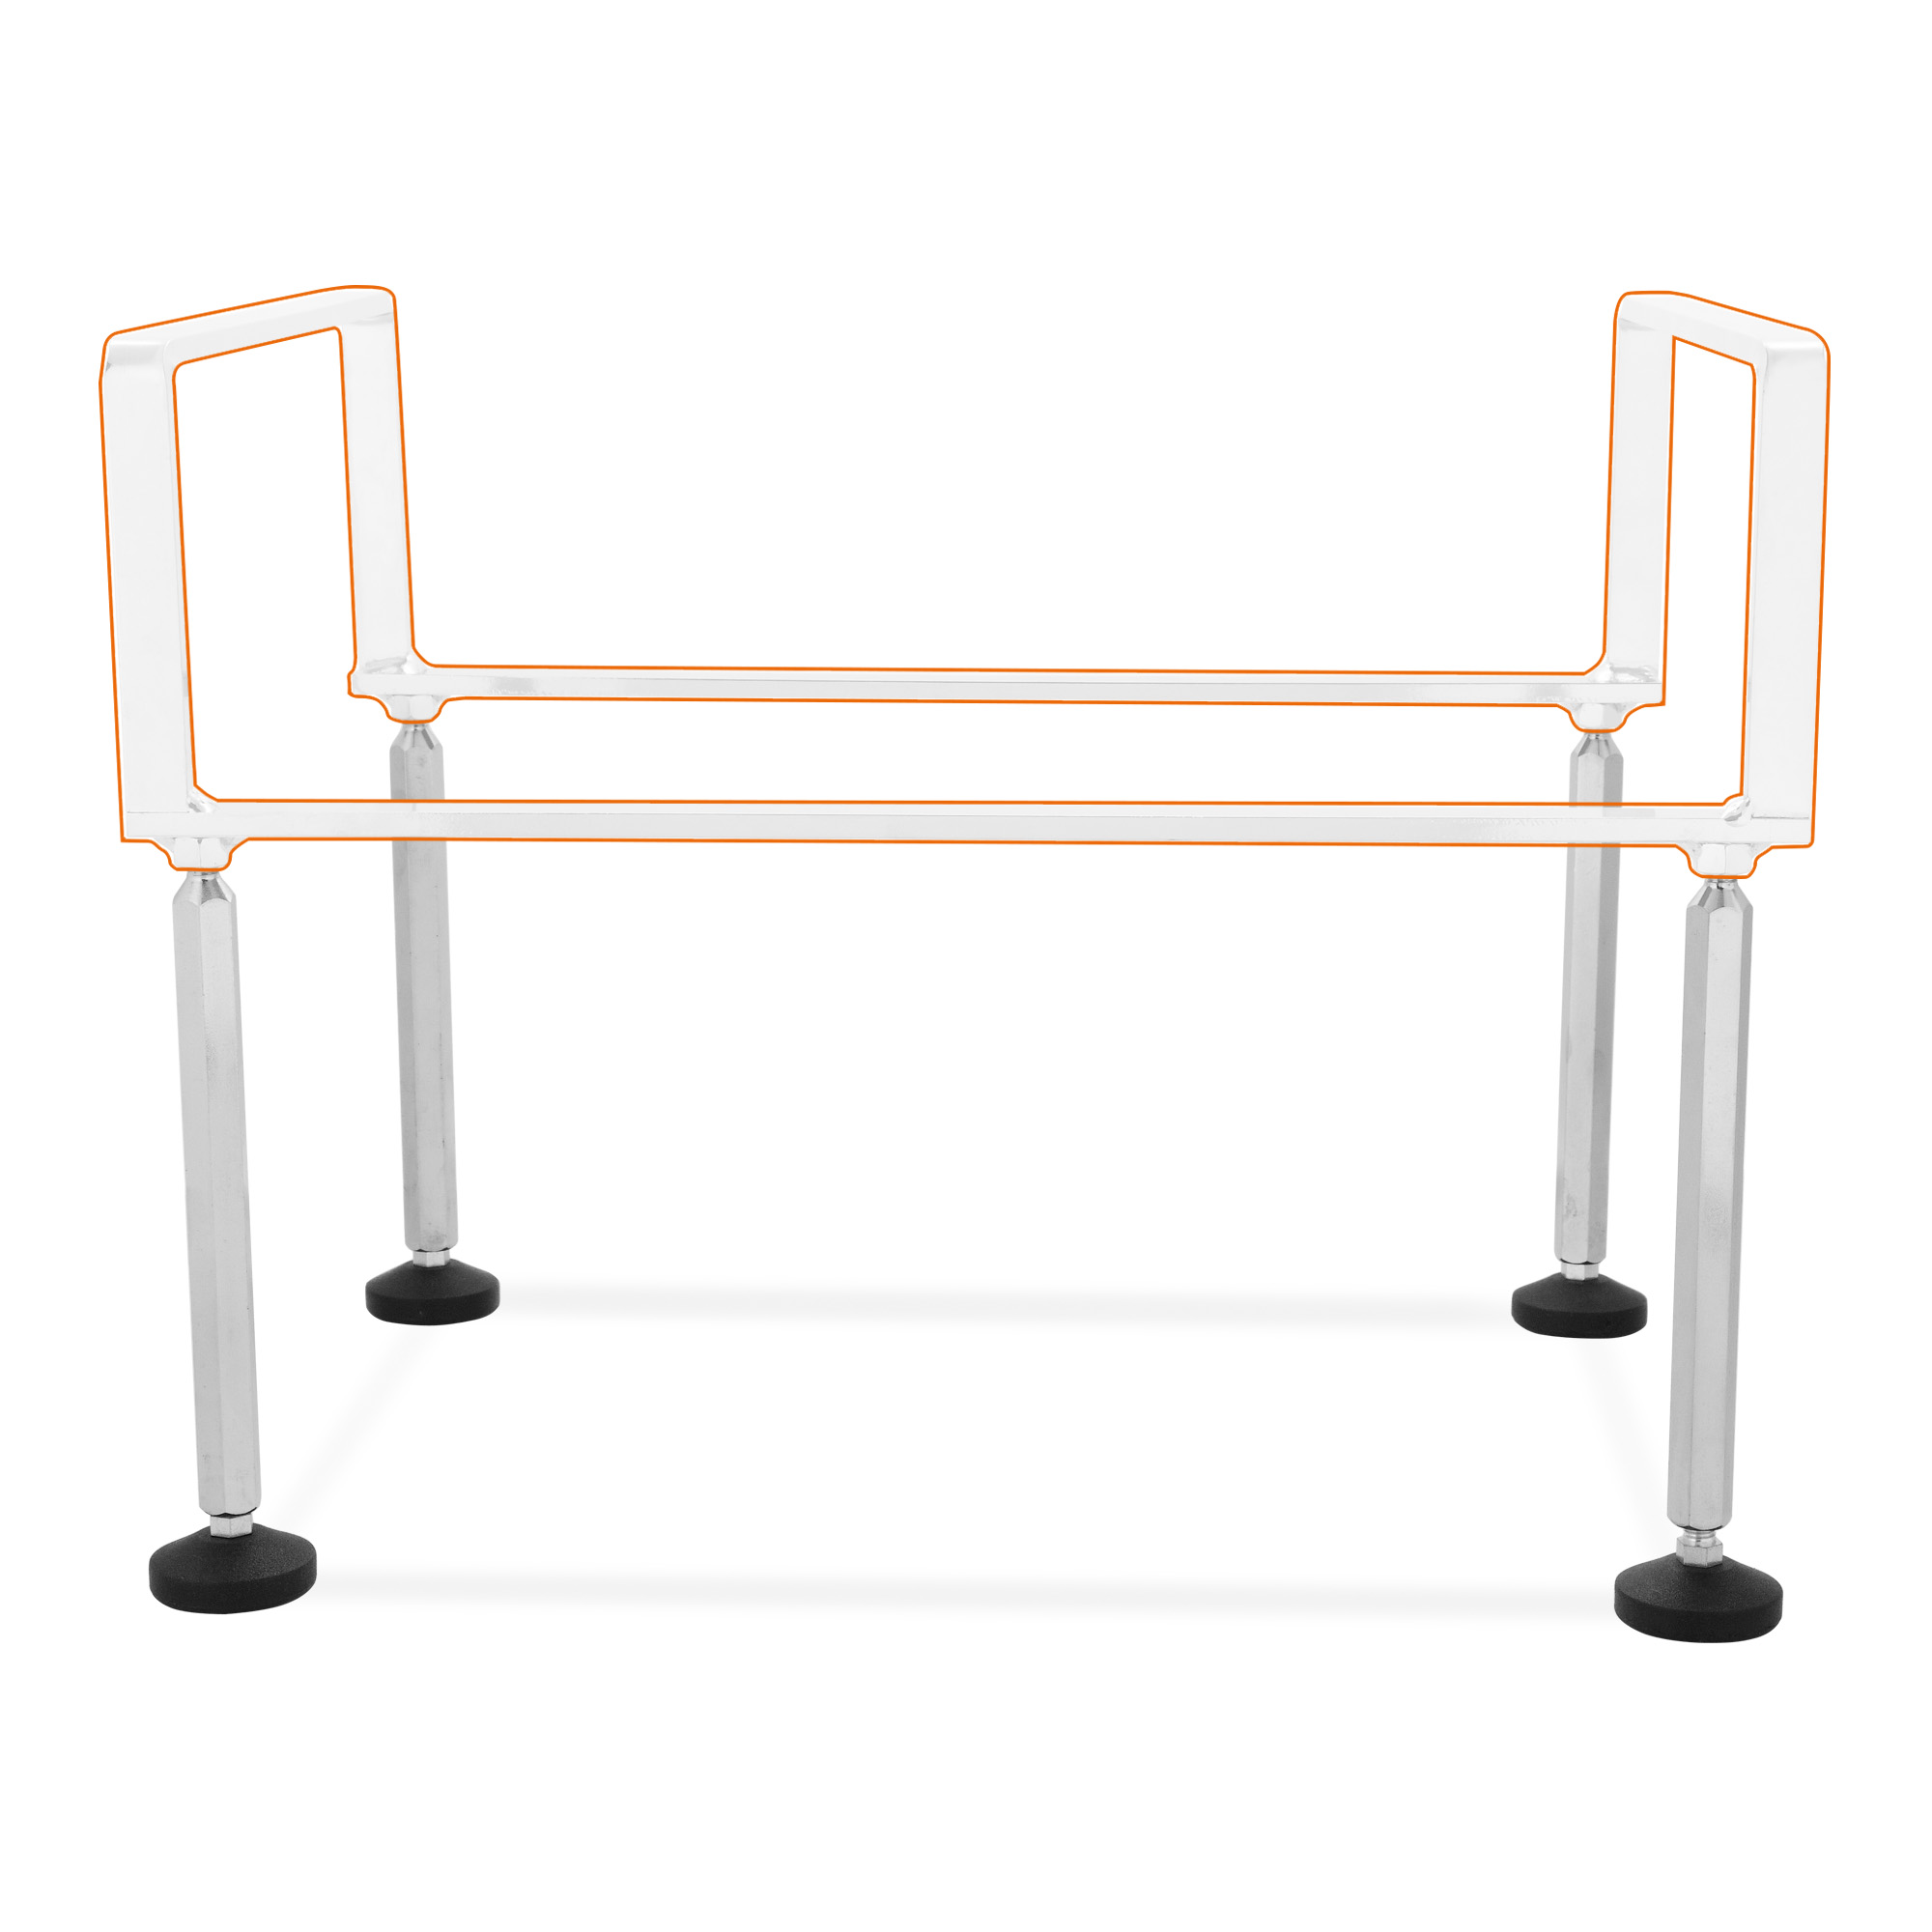 Extension to raise the Security Footbath Holder